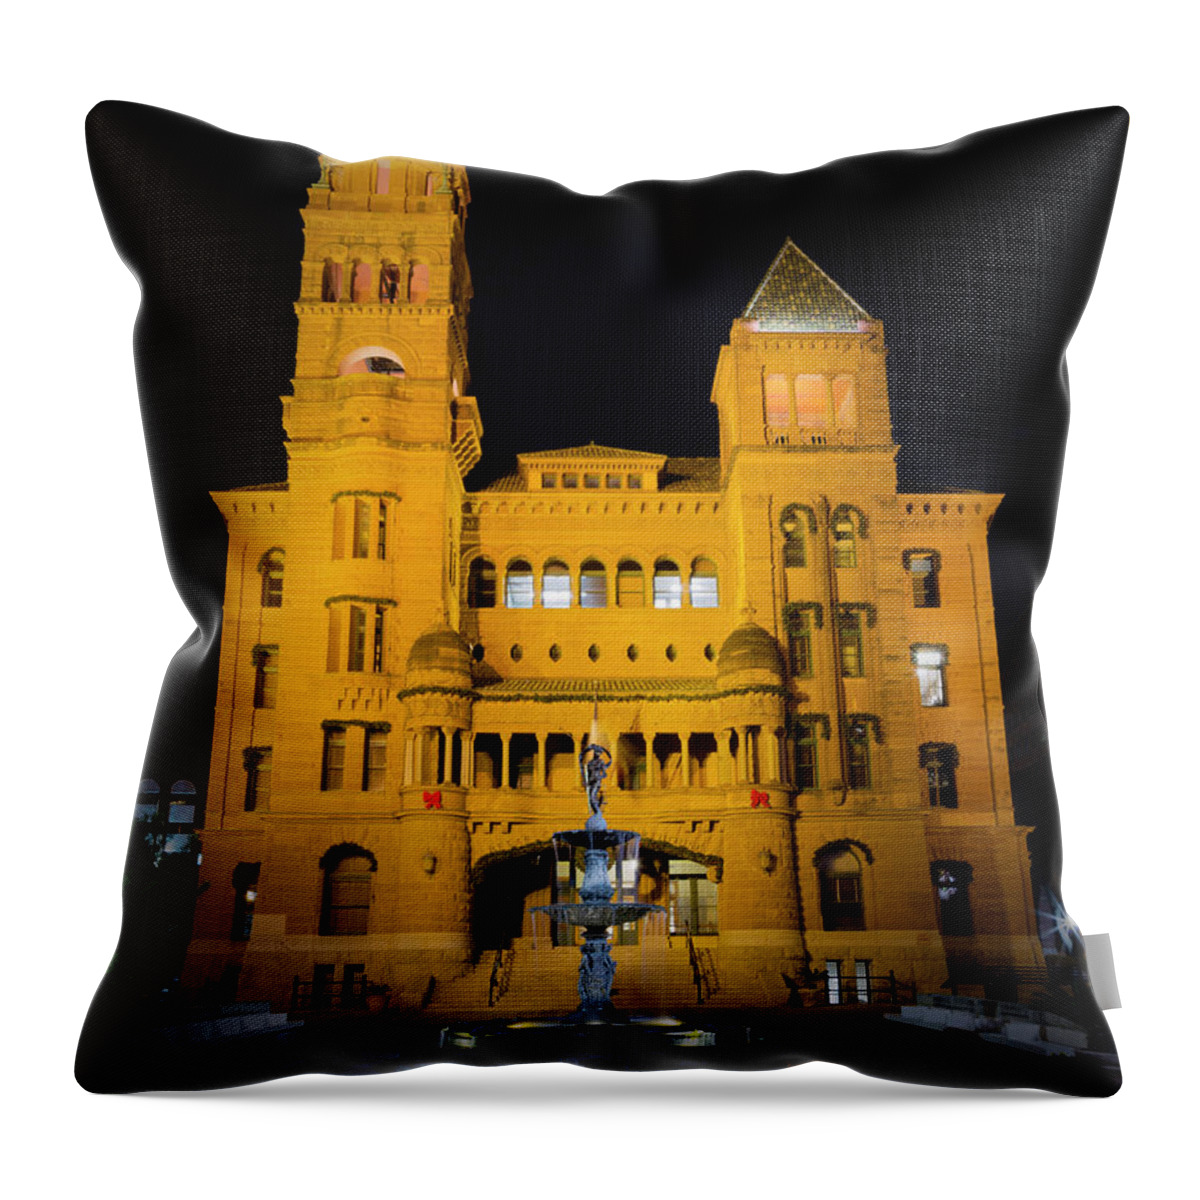 Bexar County Throw Pillow featuring the photograph Bexar County Courthouse Illumination by Stephen Stookey